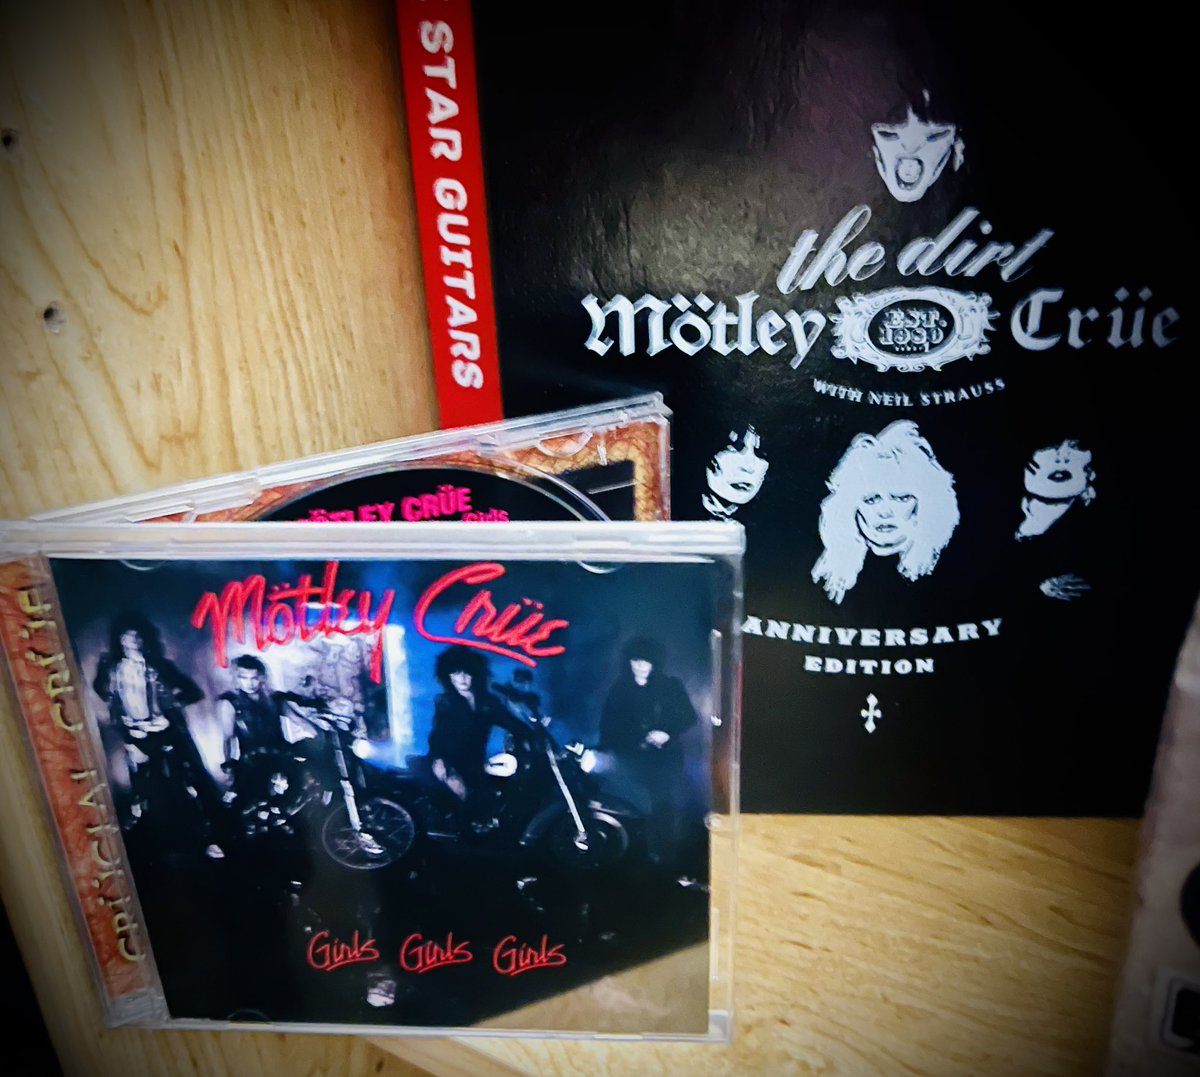 It’s been a tiring day time to kick back, relax and prepare for the work week! I hope everyone had a kick ass easter!
👯‍♀️👯‍♀️👯‍♀️👯‍♀️👯‍♀️
🔈🎶🤘😎🤘
🏍️🏍️🏍️🏍️🏍️

#NowPlaying #MötleyCrüe #GirlsGirlsGirls #PhysicalMusic